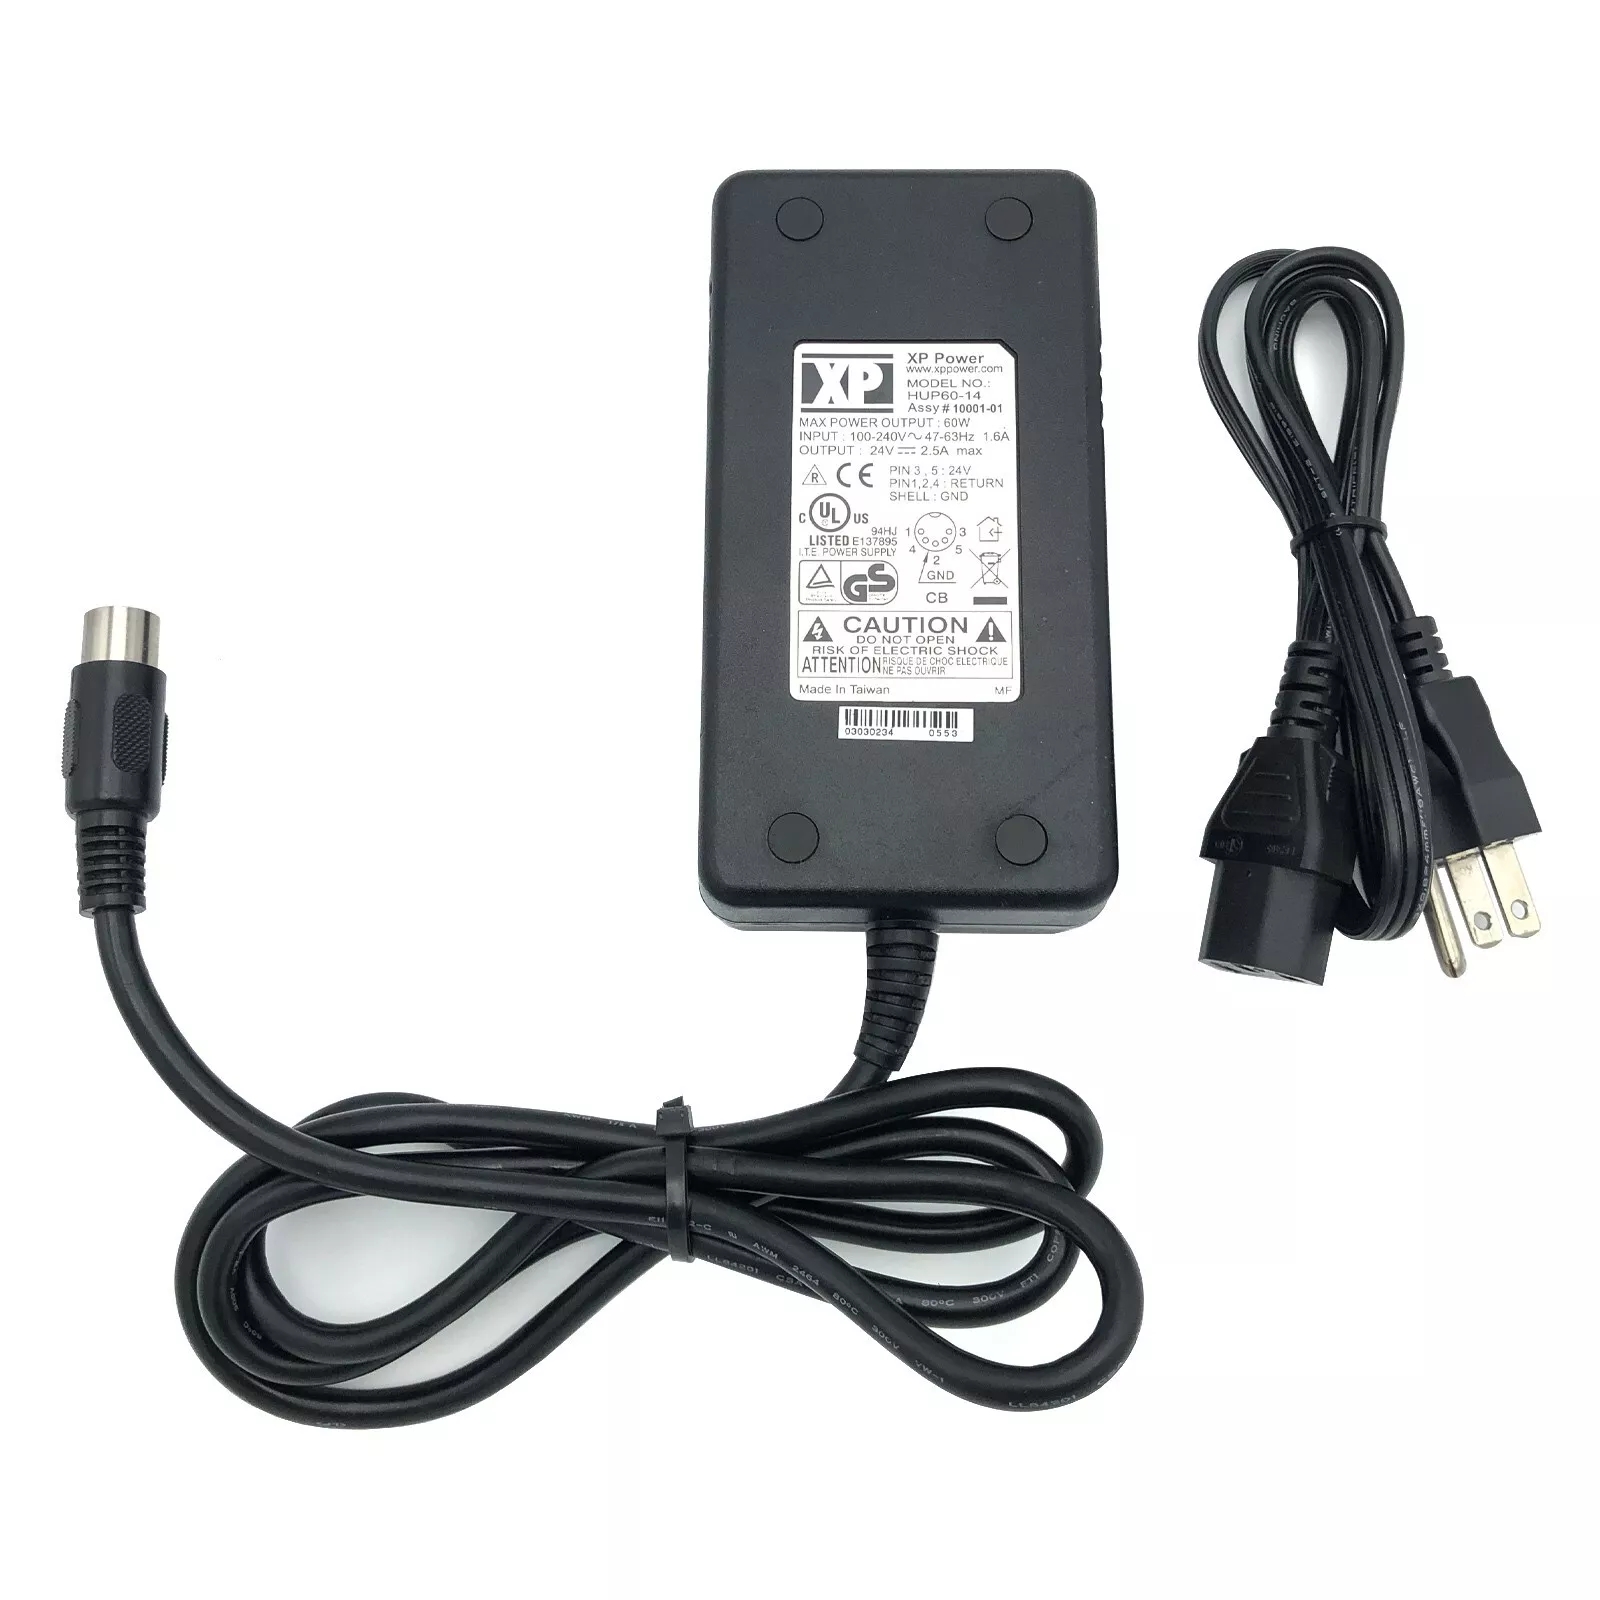 *Brand NEW*Genuine XP Power HUP60-14 24V 2.5A AC Adapter Power Supply 5Pin